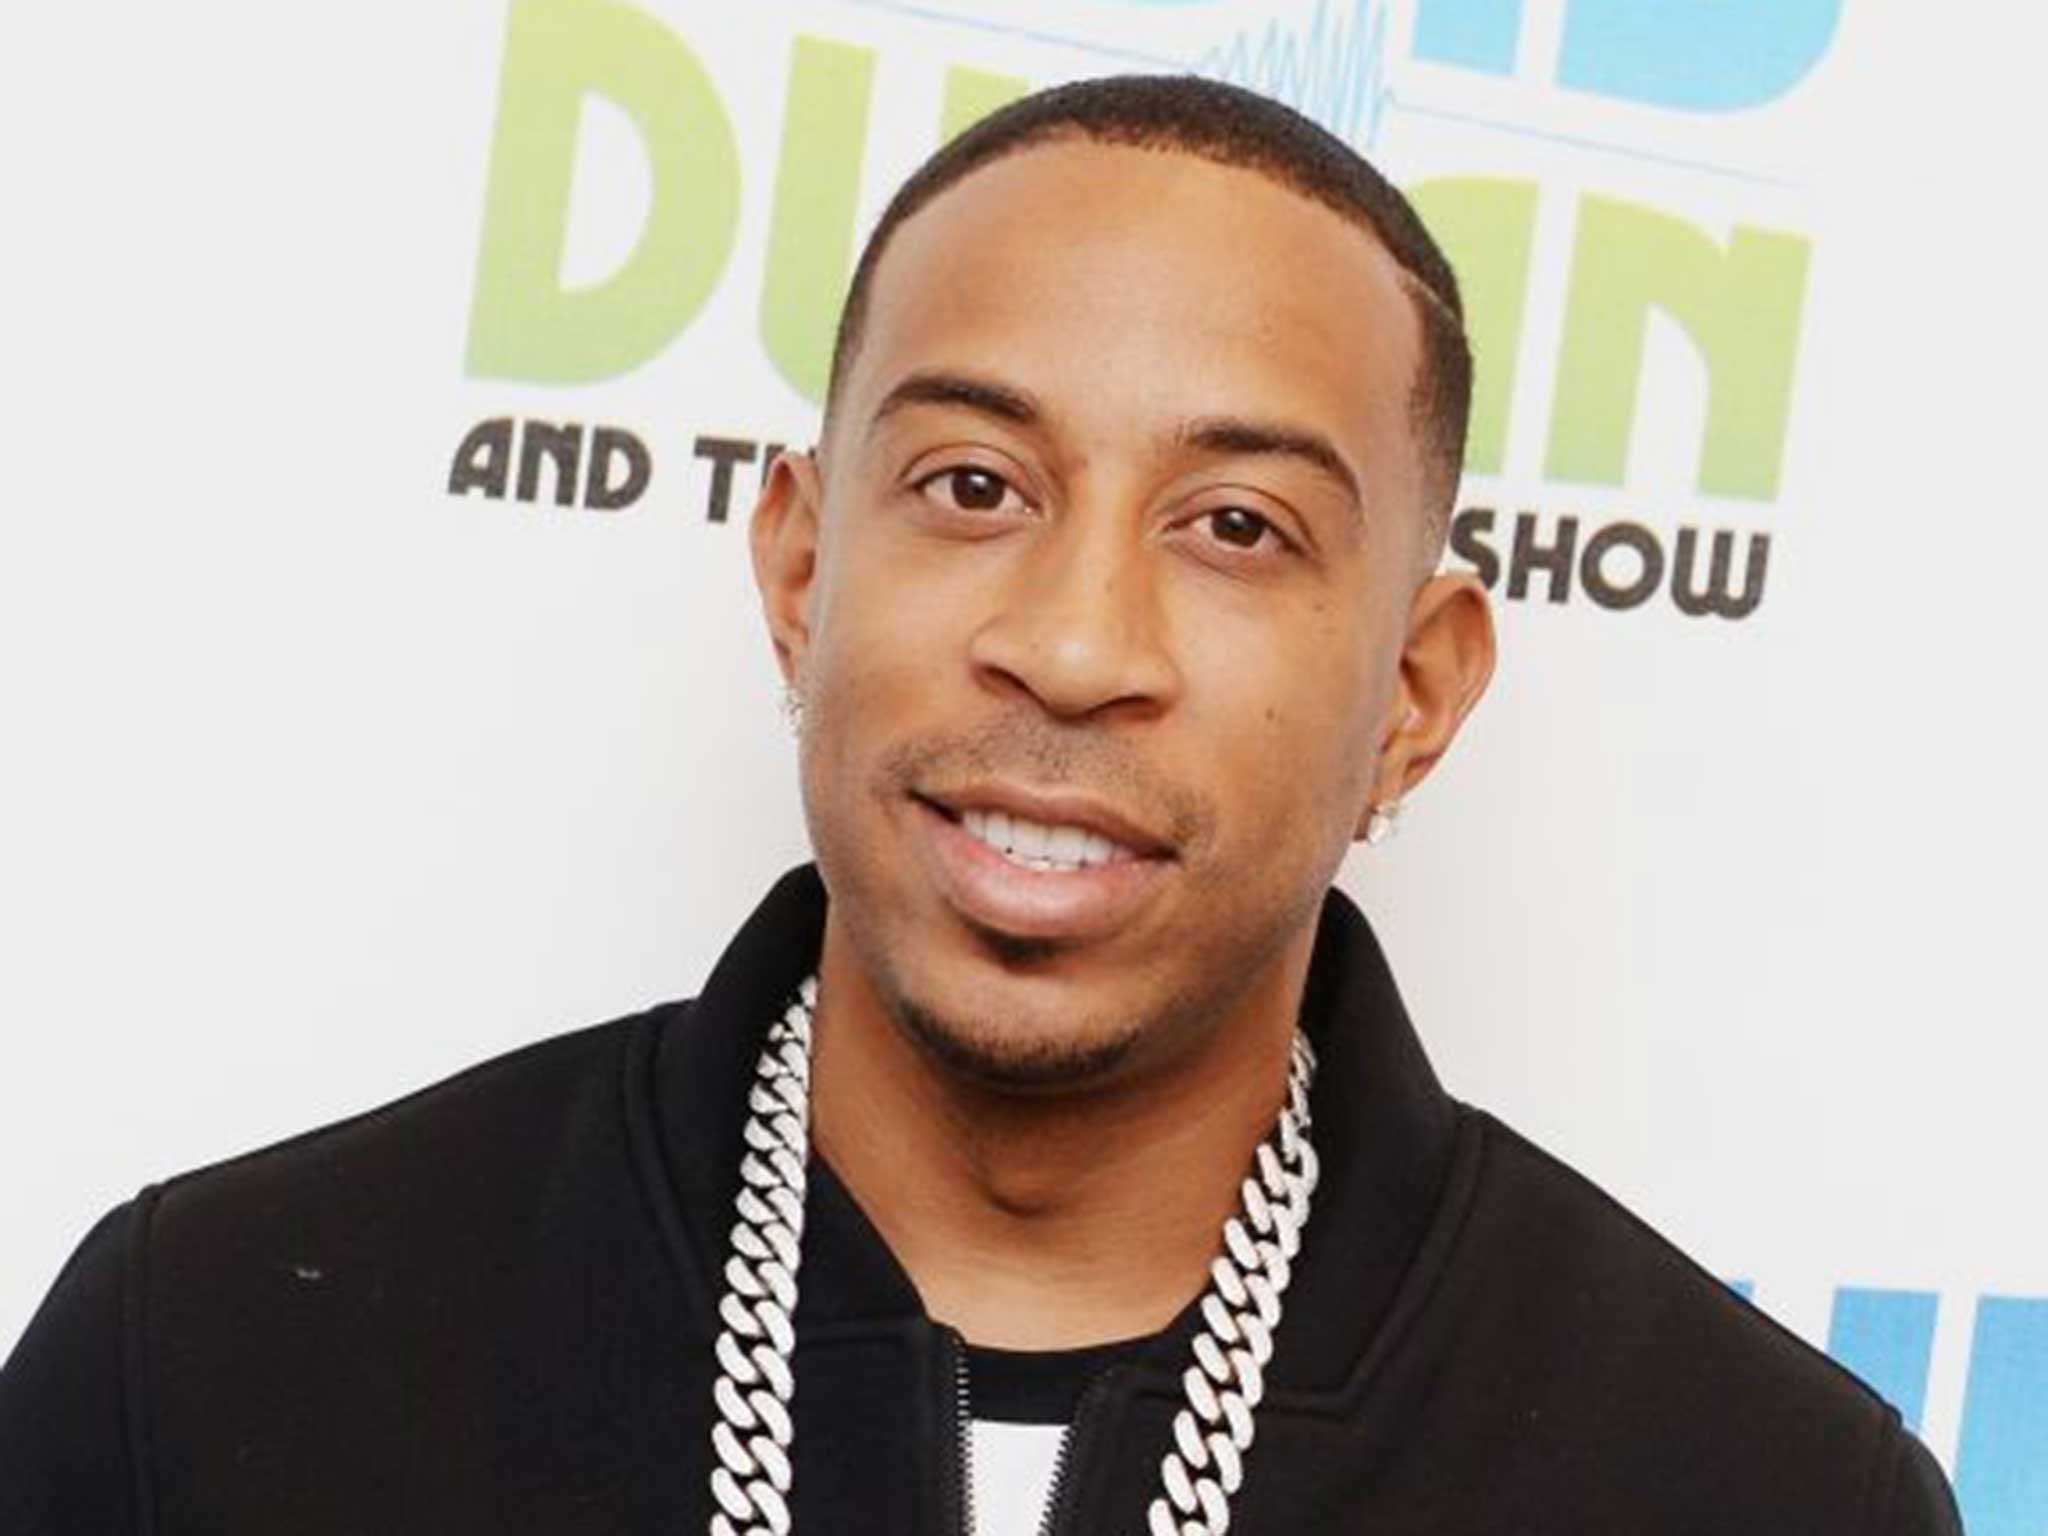 Ludacris has said that some of the jokes about Paul Walker on Comedy Central were 'over the line'